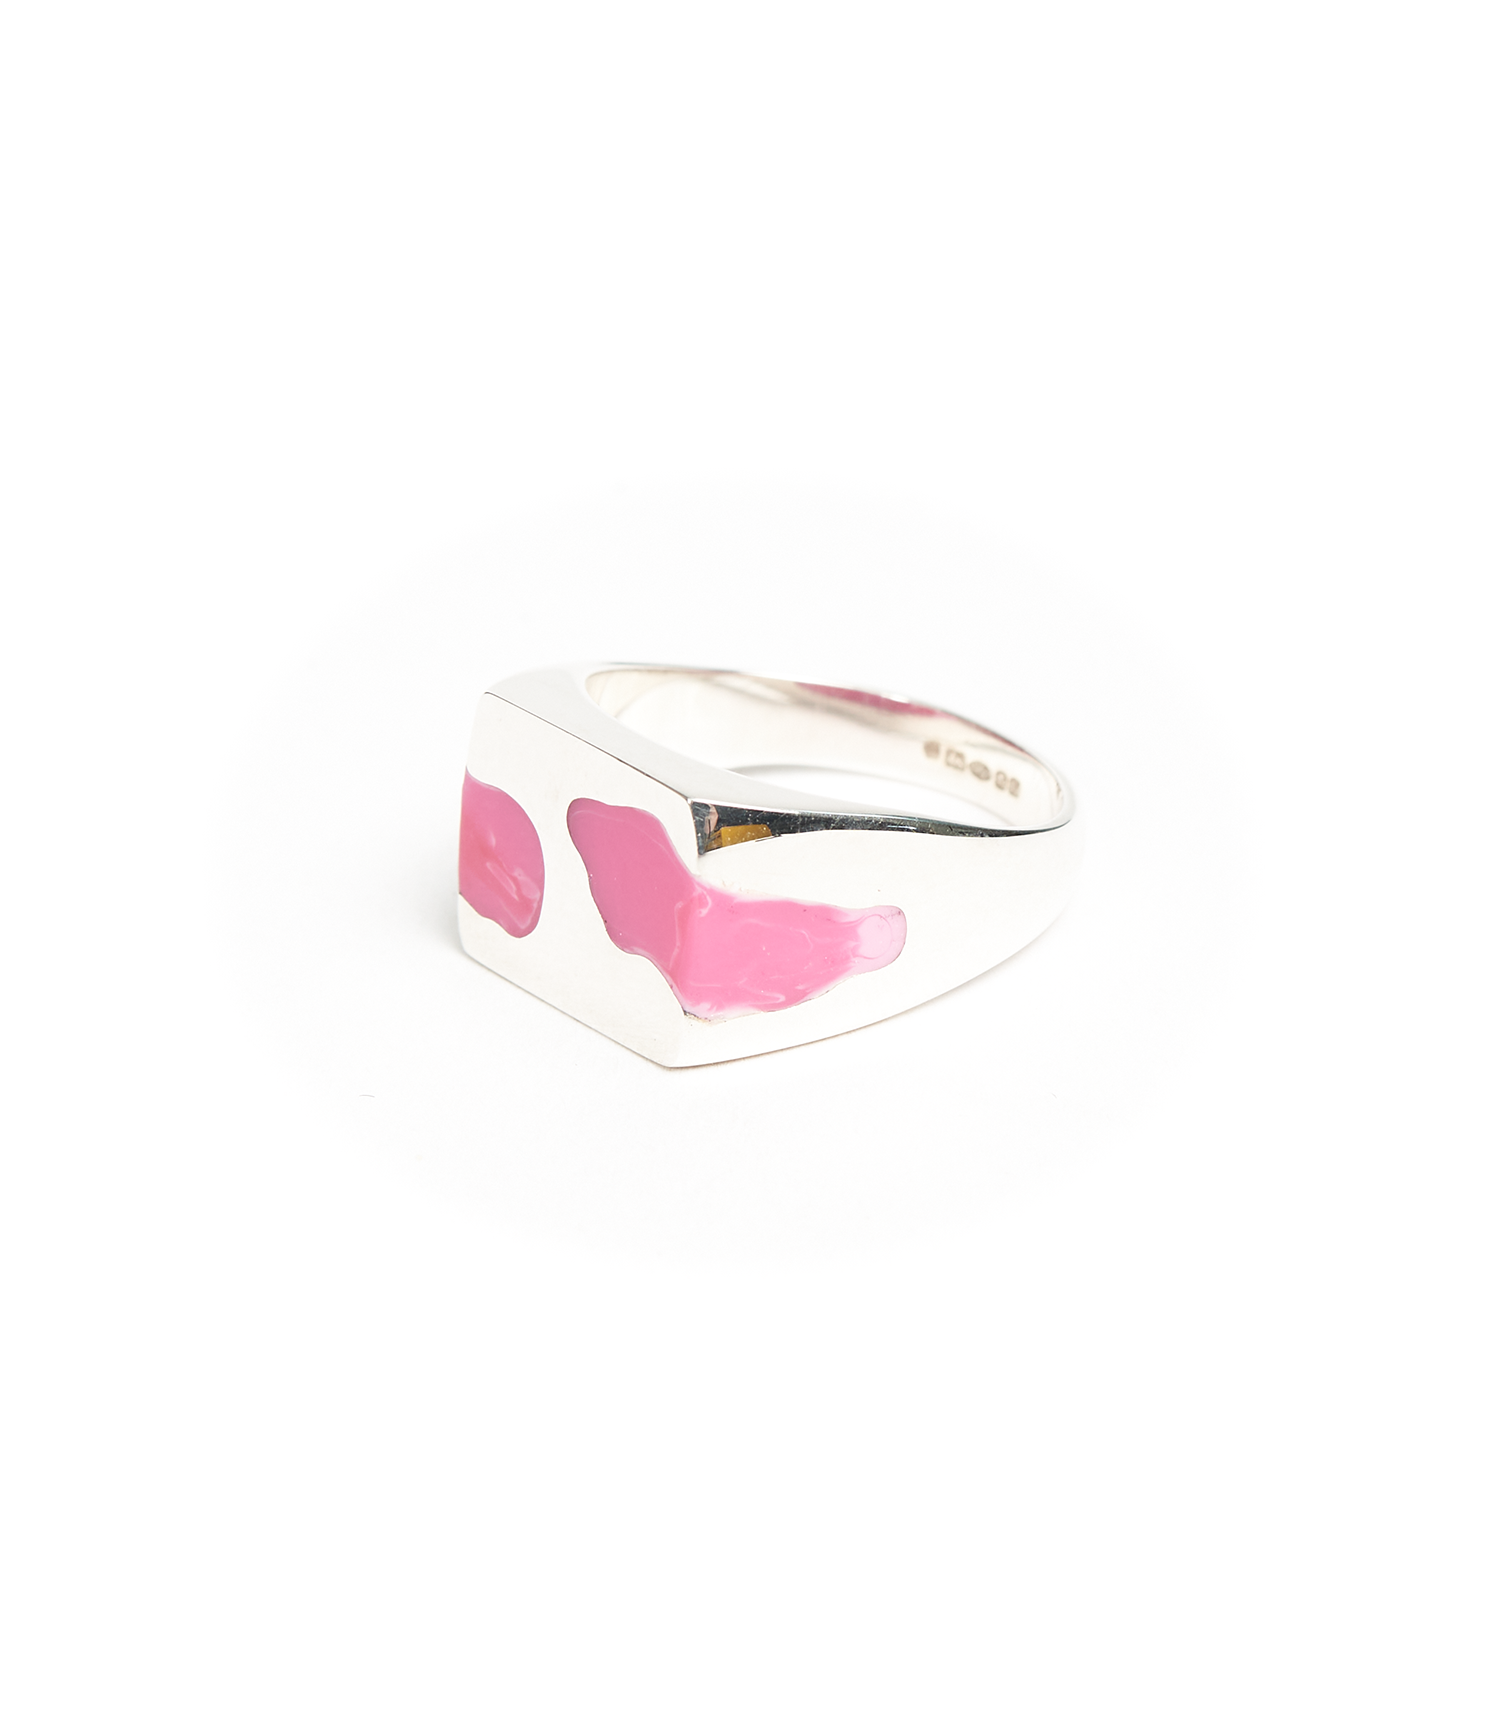 Two Piece Signet Ring - 925 Sterling Silver / Pink Resin